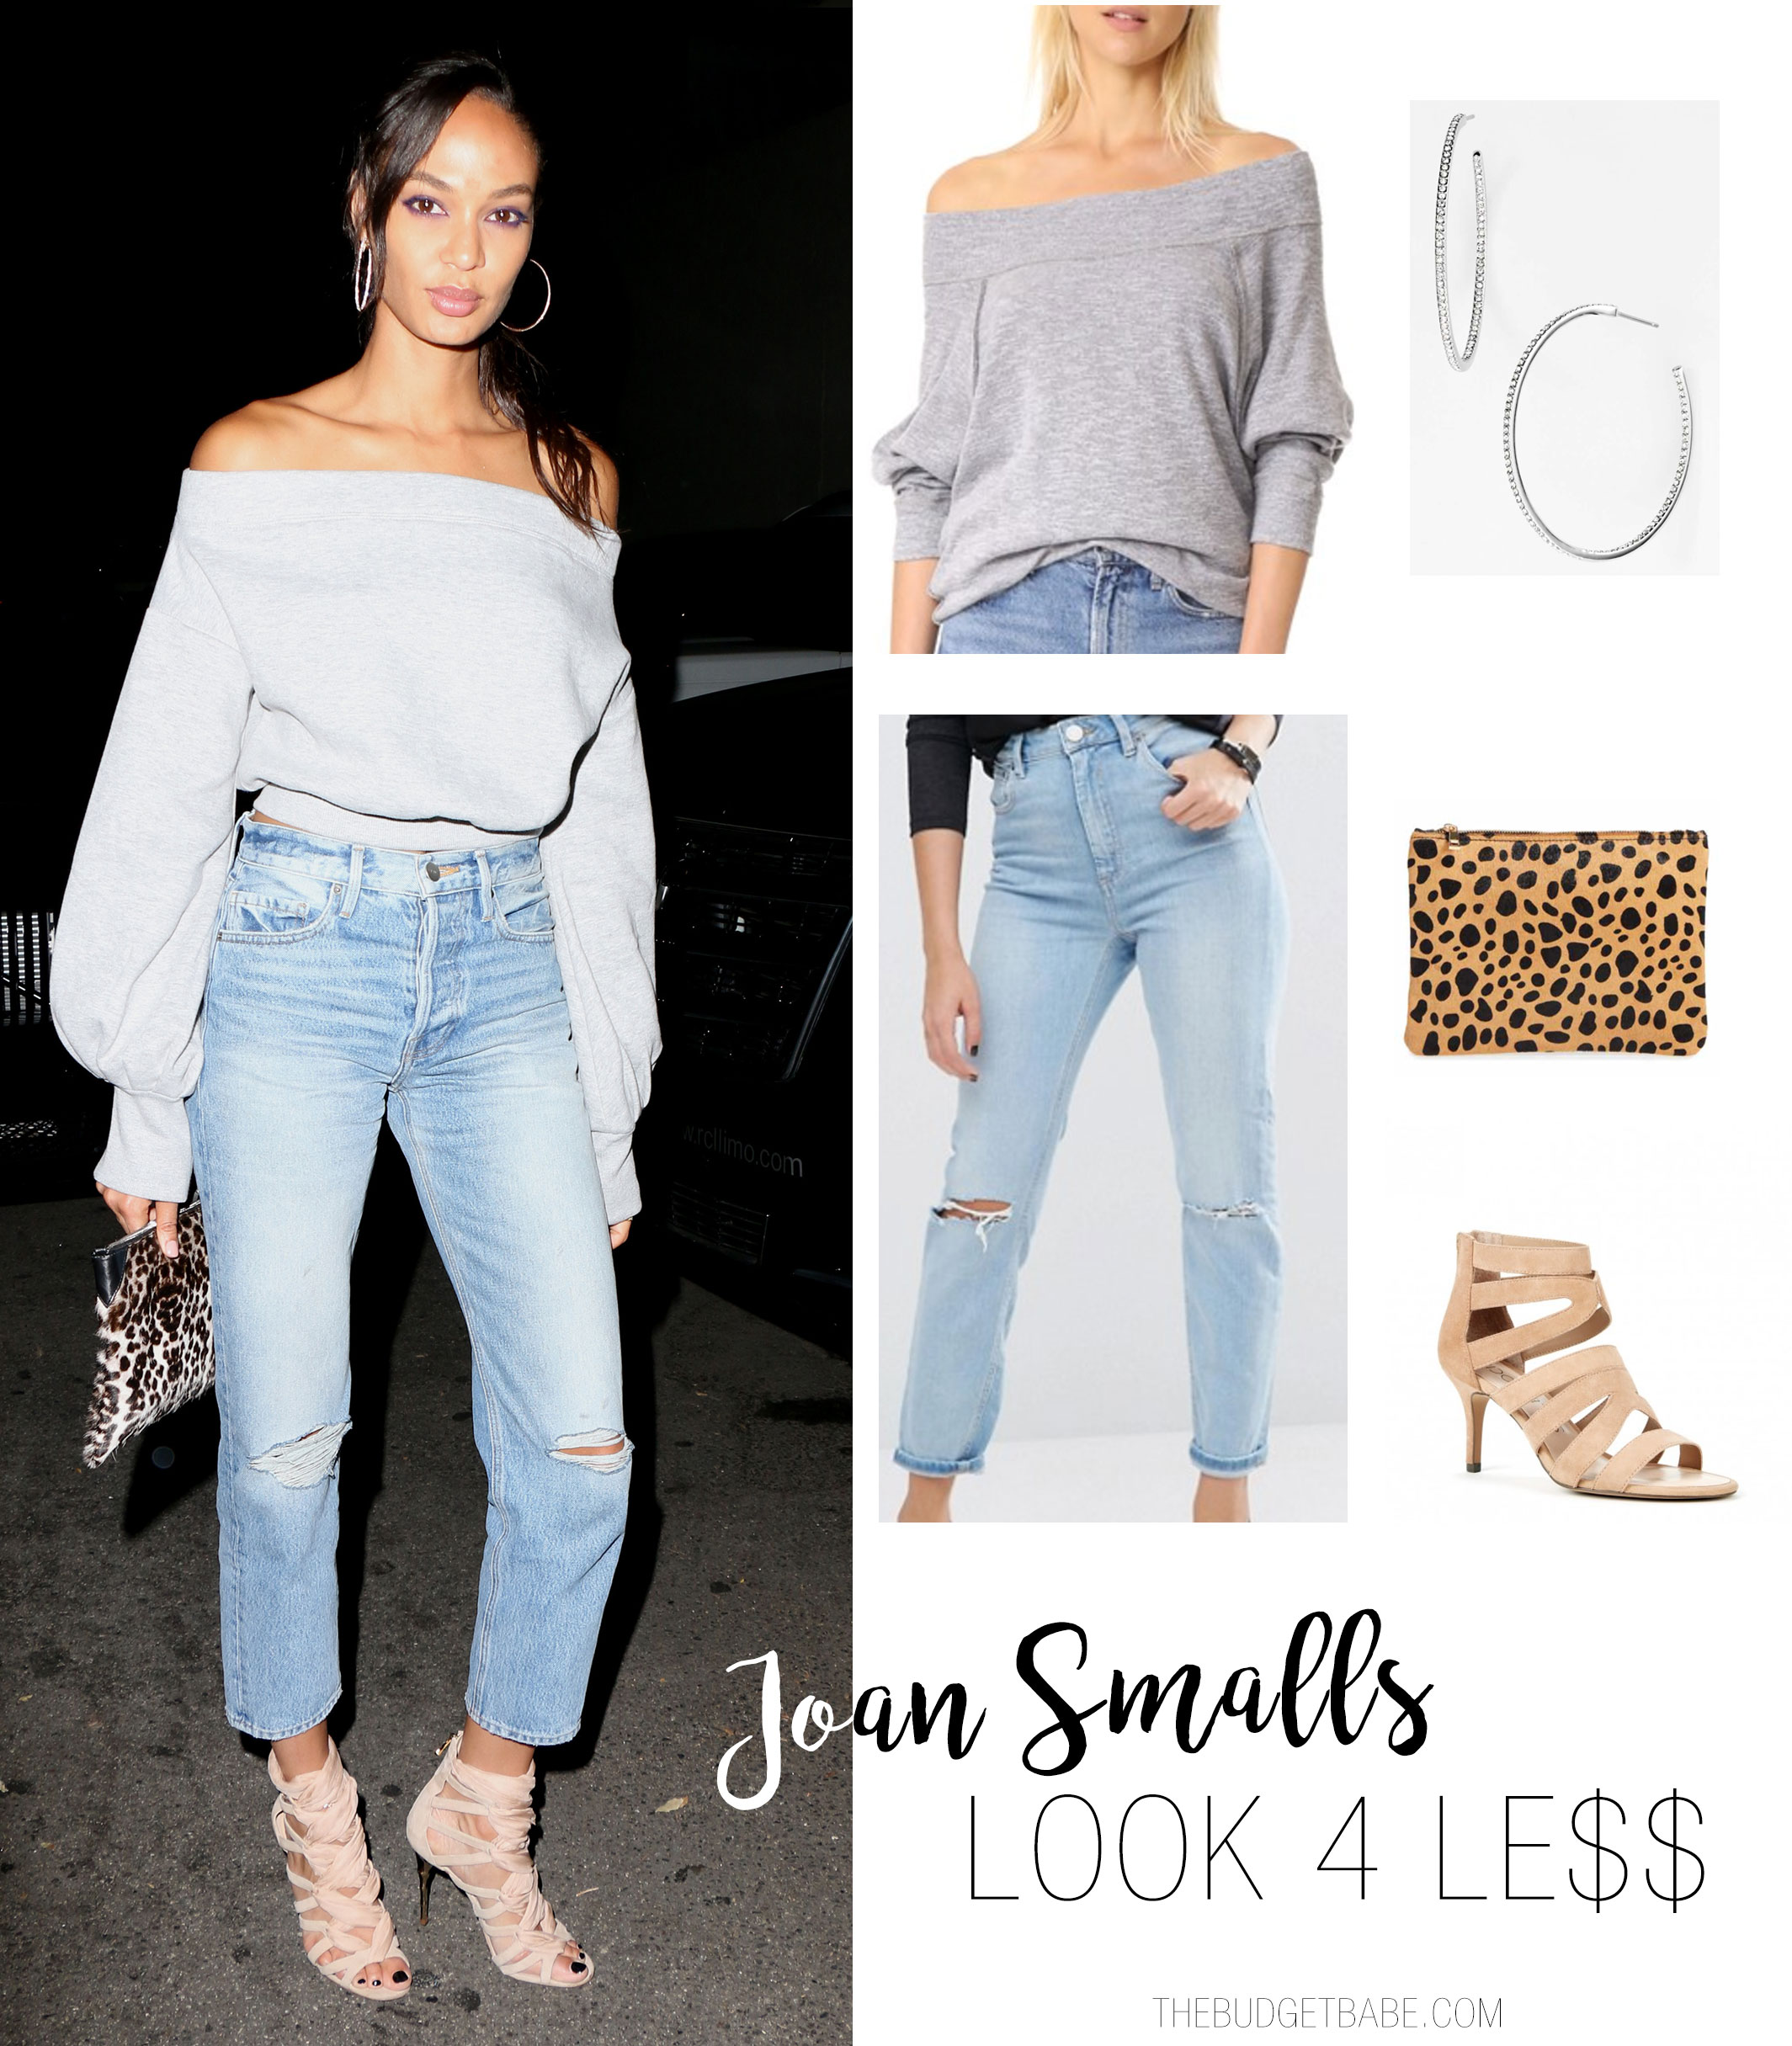 Joan Smalls wears an off-the-shoulder sweatshirt with high-waist jeans and cage sandals.